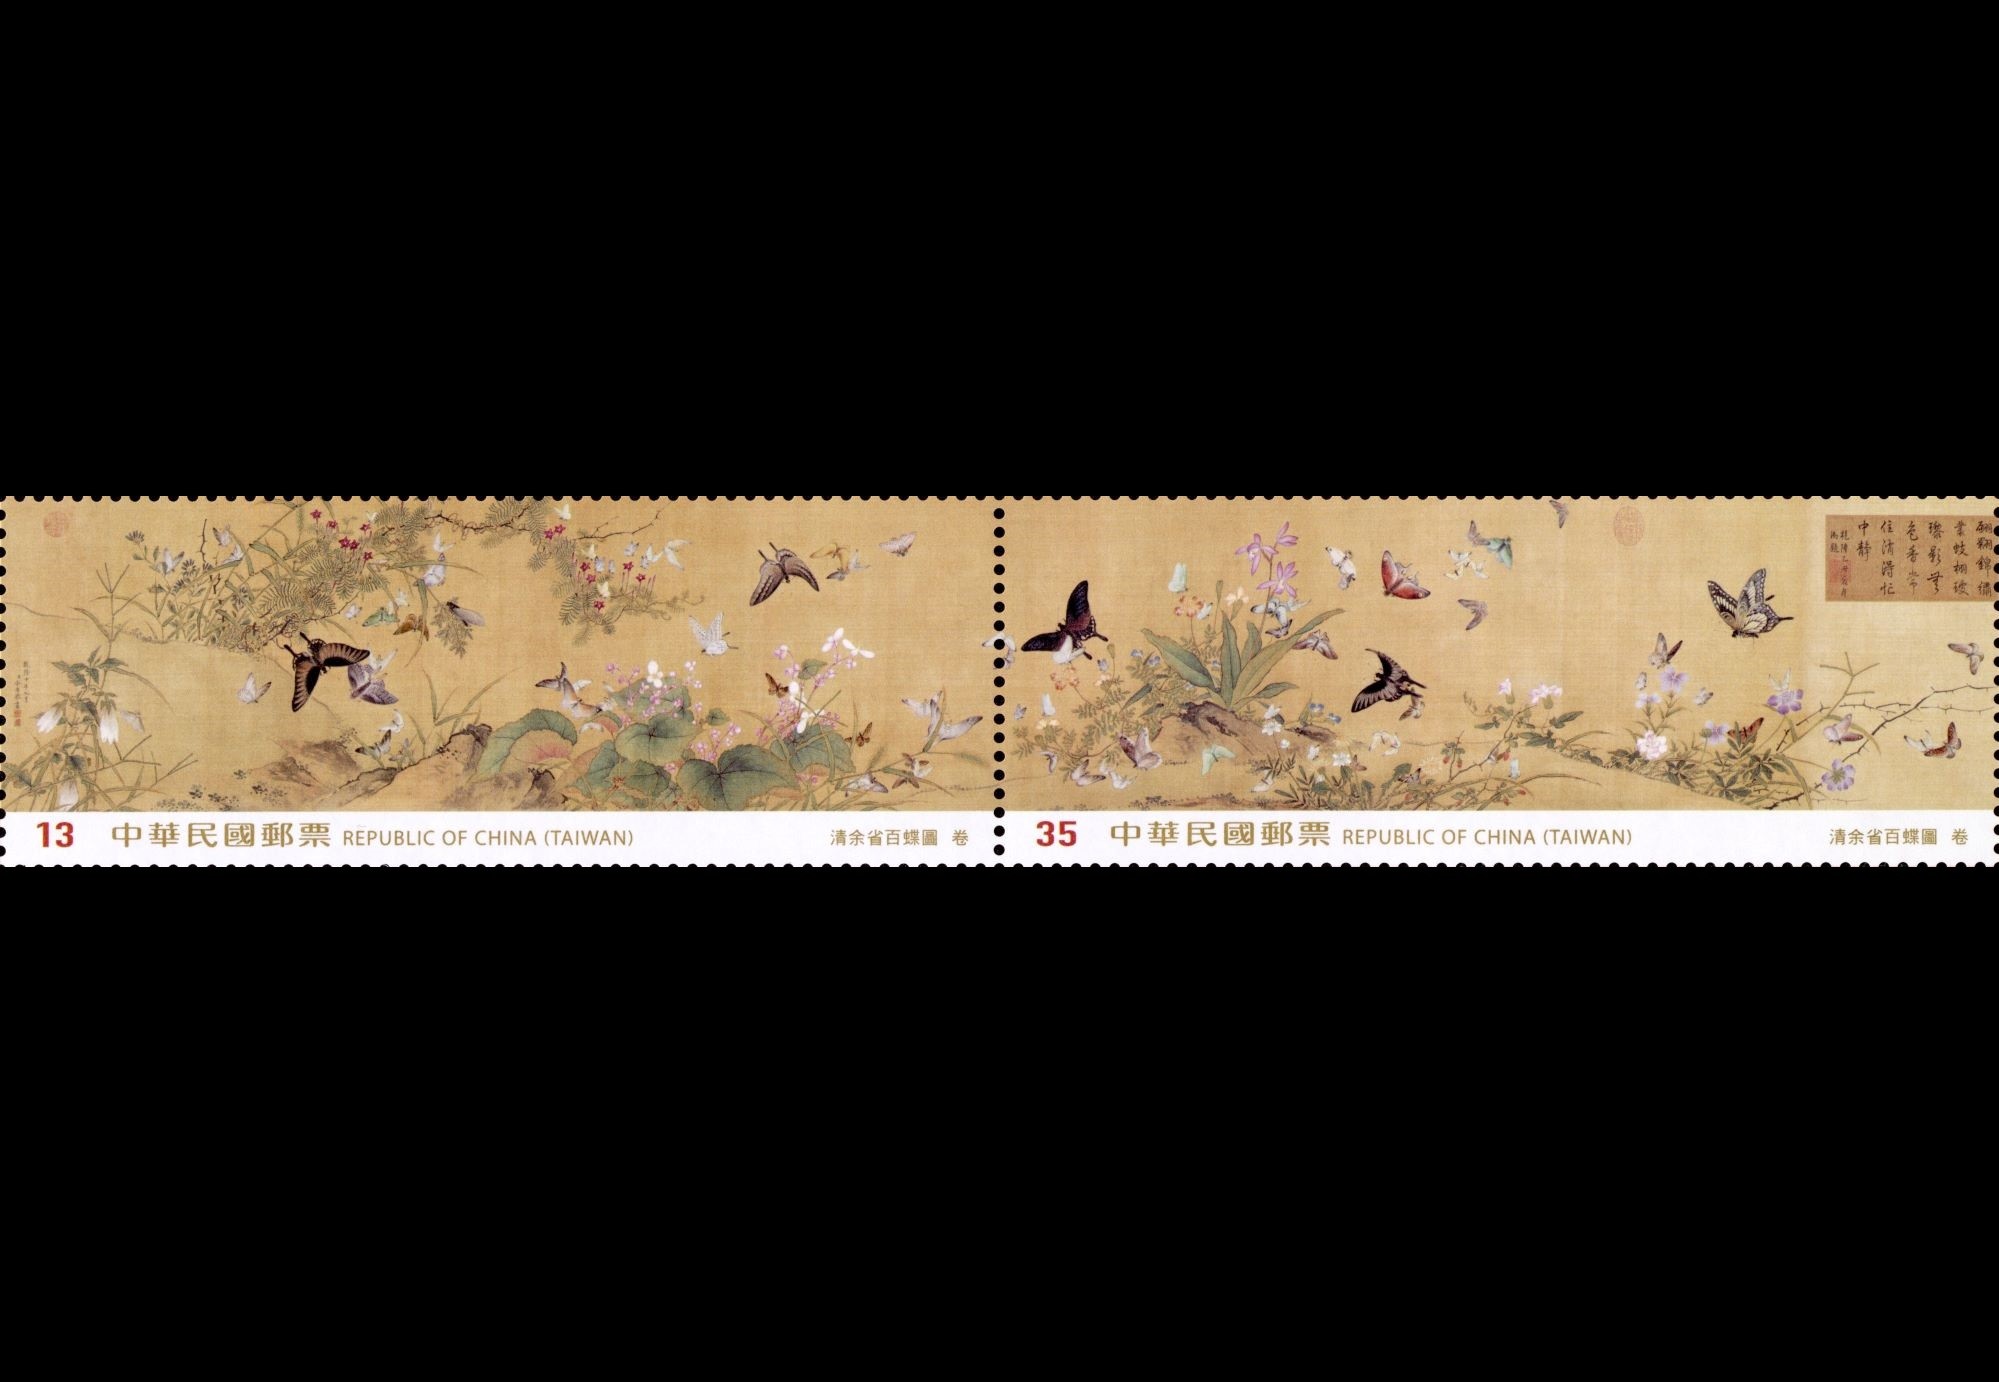 (Sp.741.1- 741.2)Sp.741 TAIPEI 2023 – 39th Asian International Stamp Exhibition Postage Stamps: Myriad Butterflies